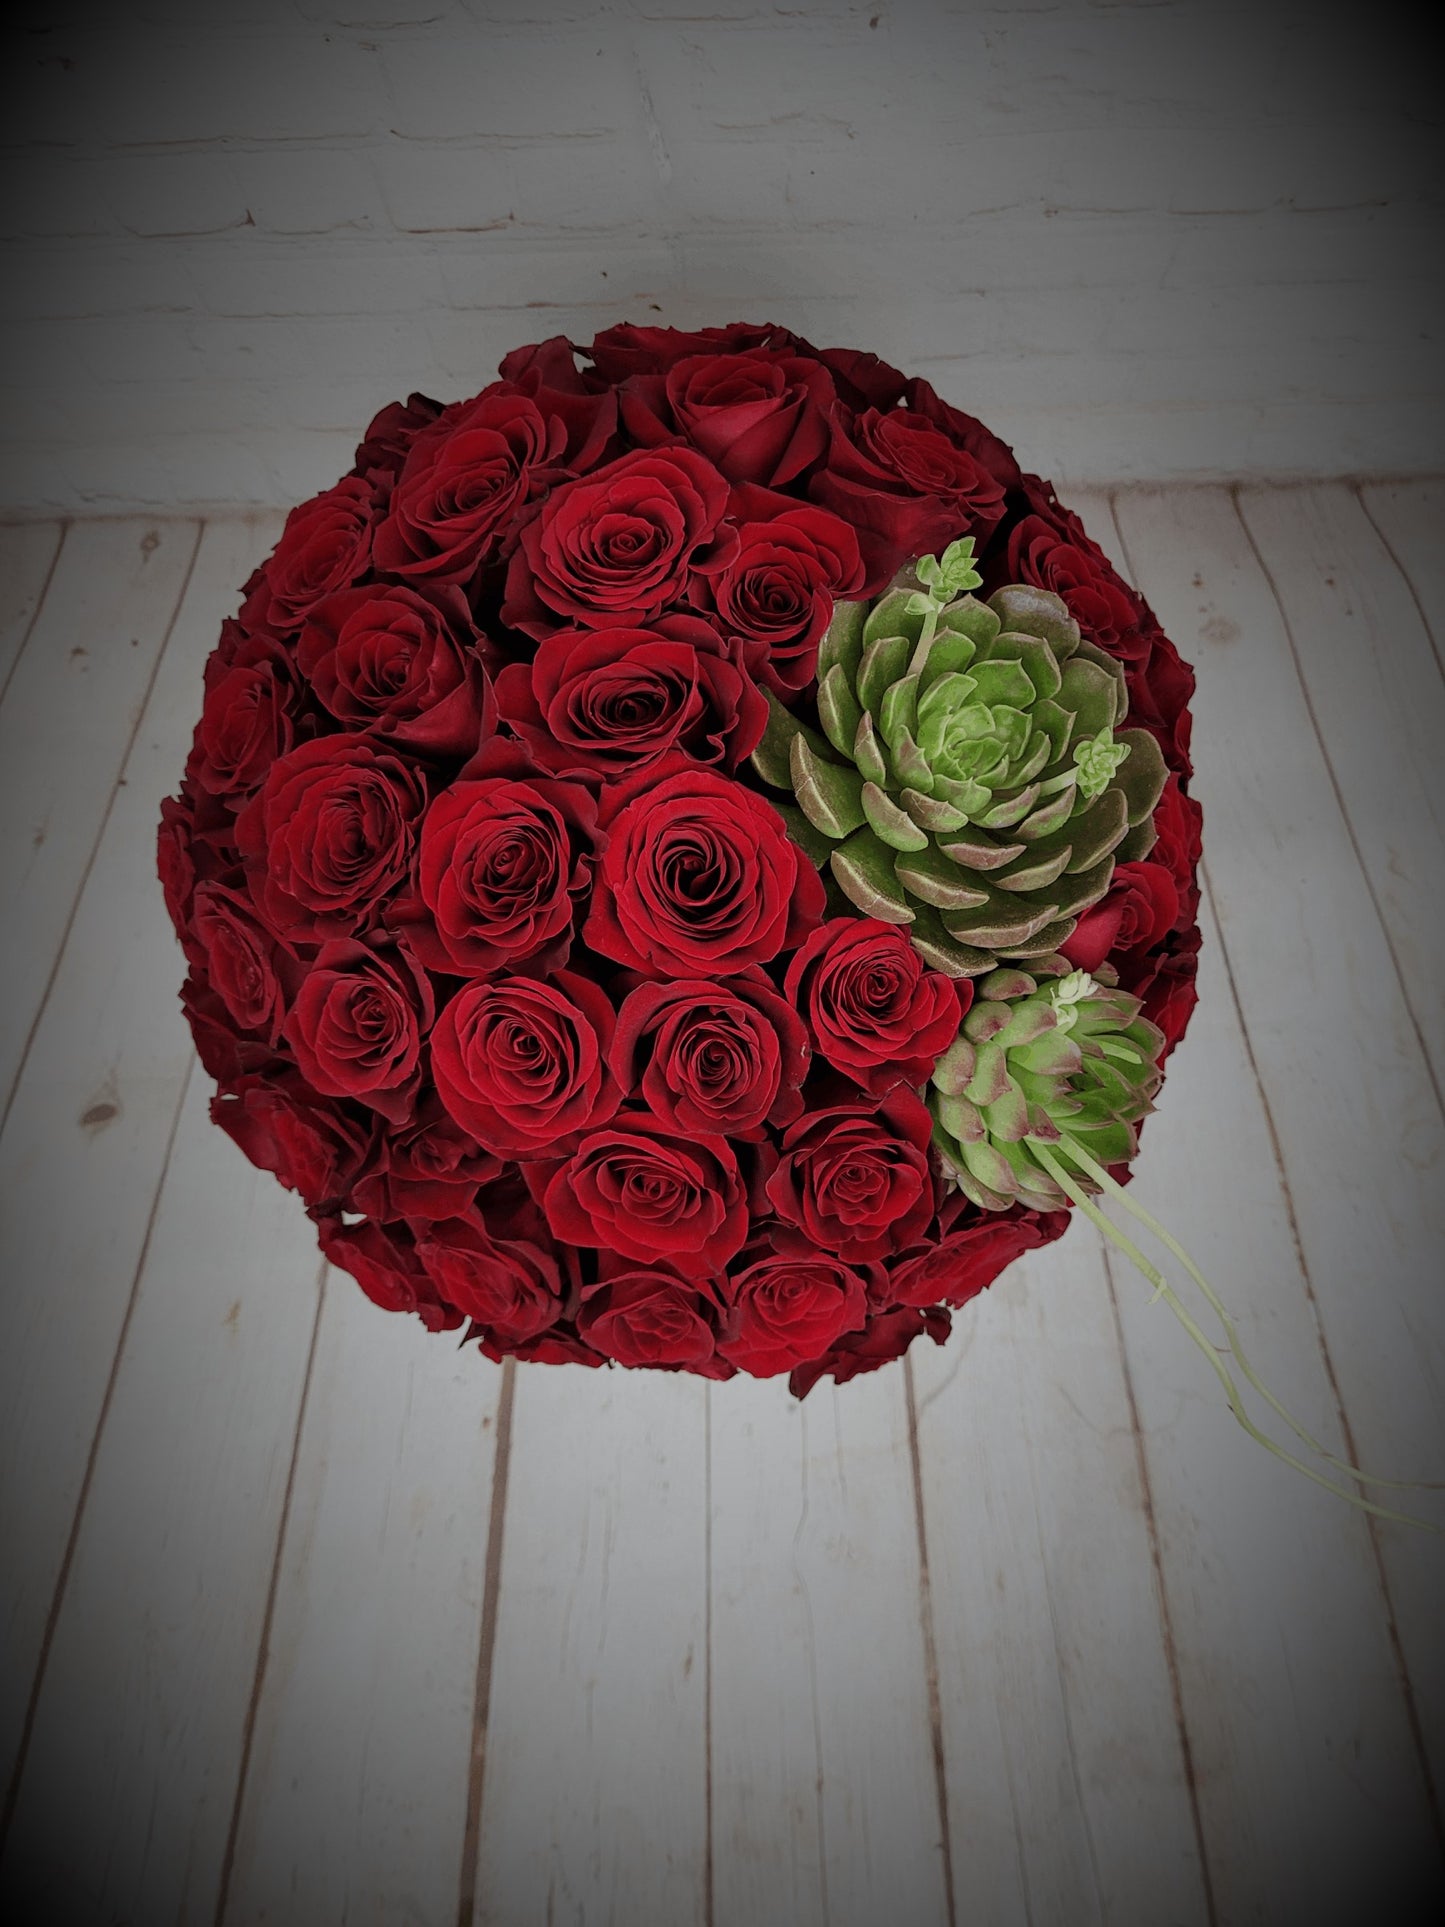 65-75 Red Roses and Succulents